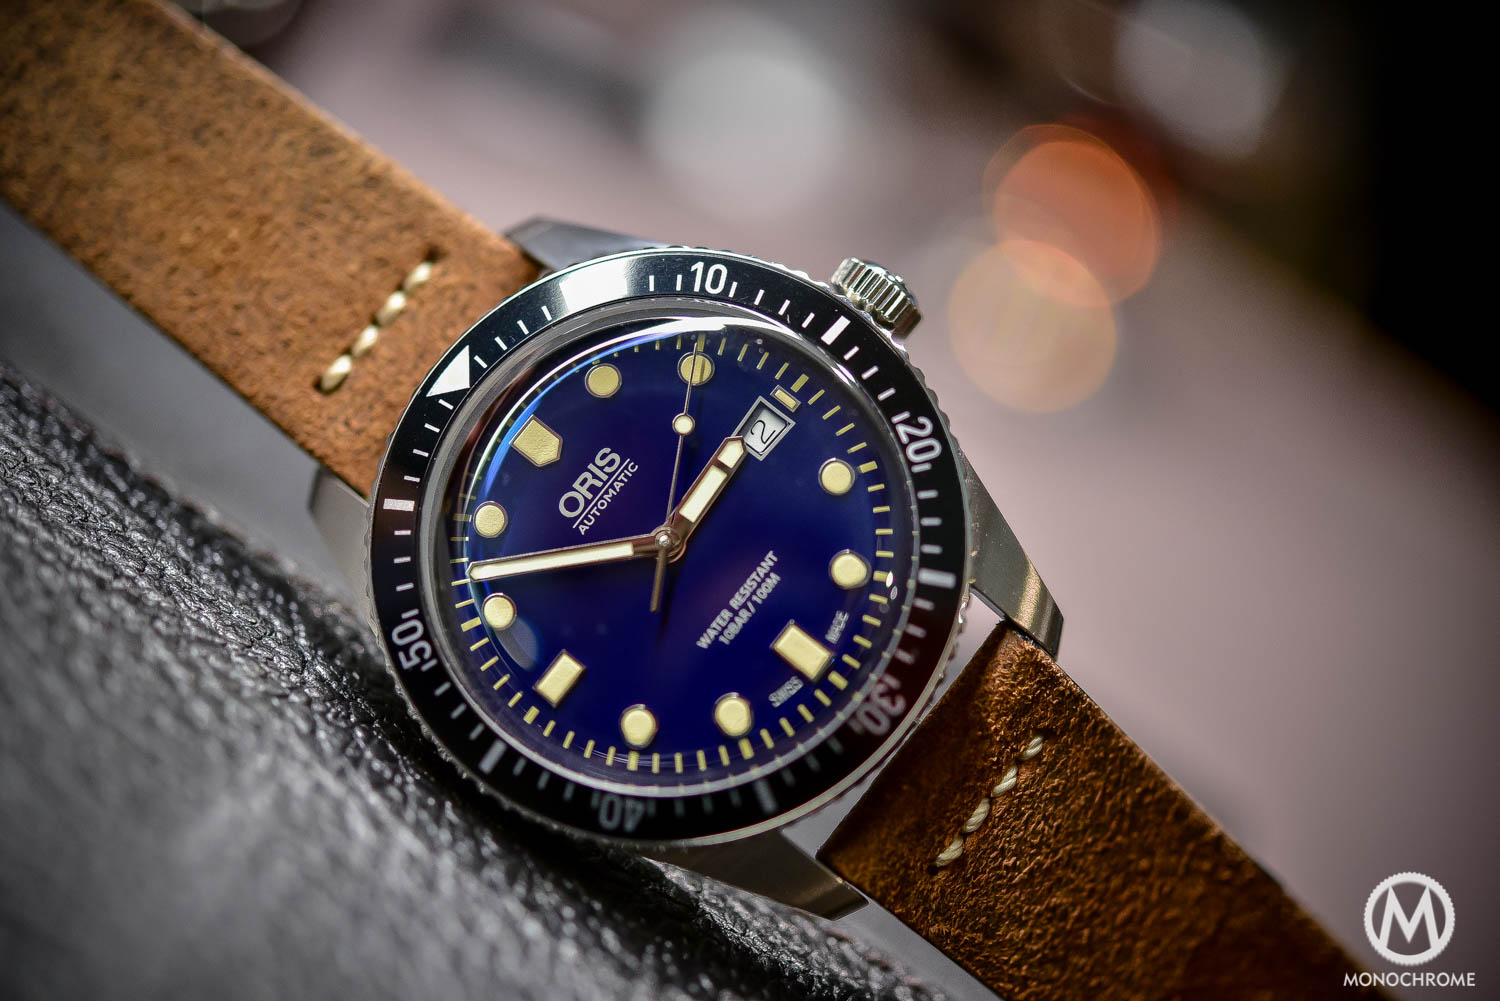 Oris Divers Sixty Five 42mm Blue Dial - Baselworld 2016 - Distressed leather